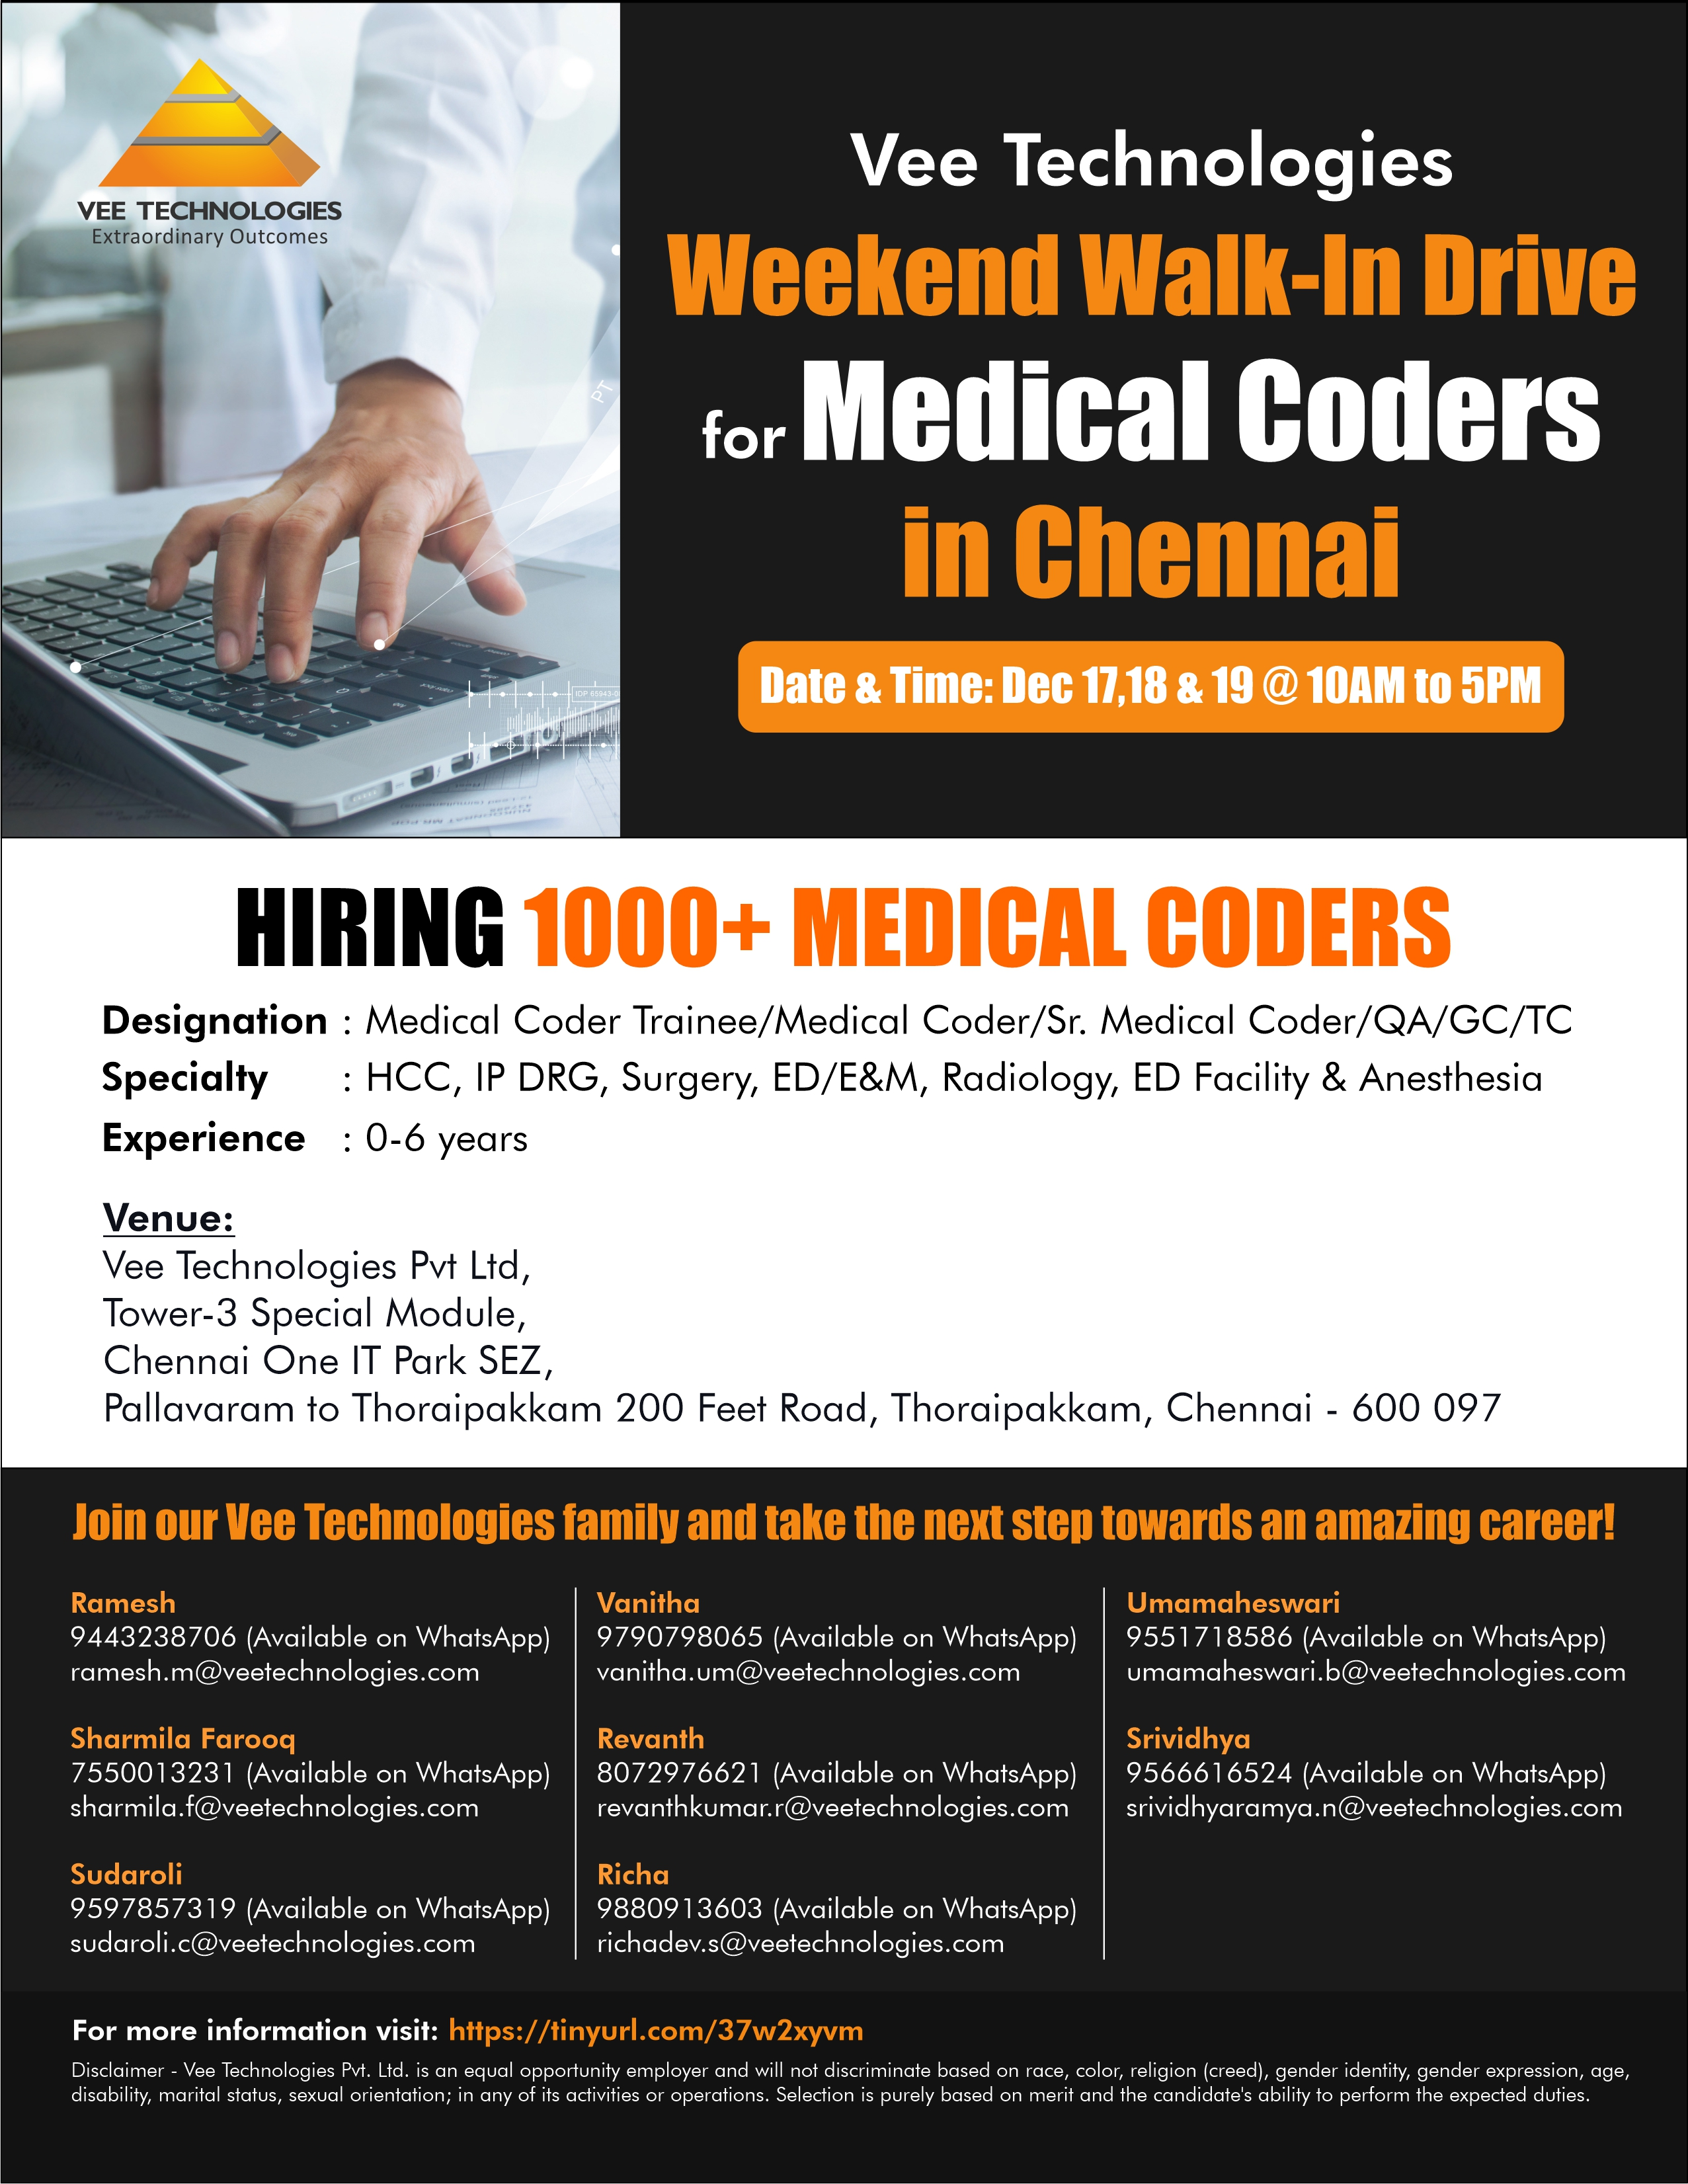 Walk-In Drive for Medical Coders @Vee Technologies, Chennai'